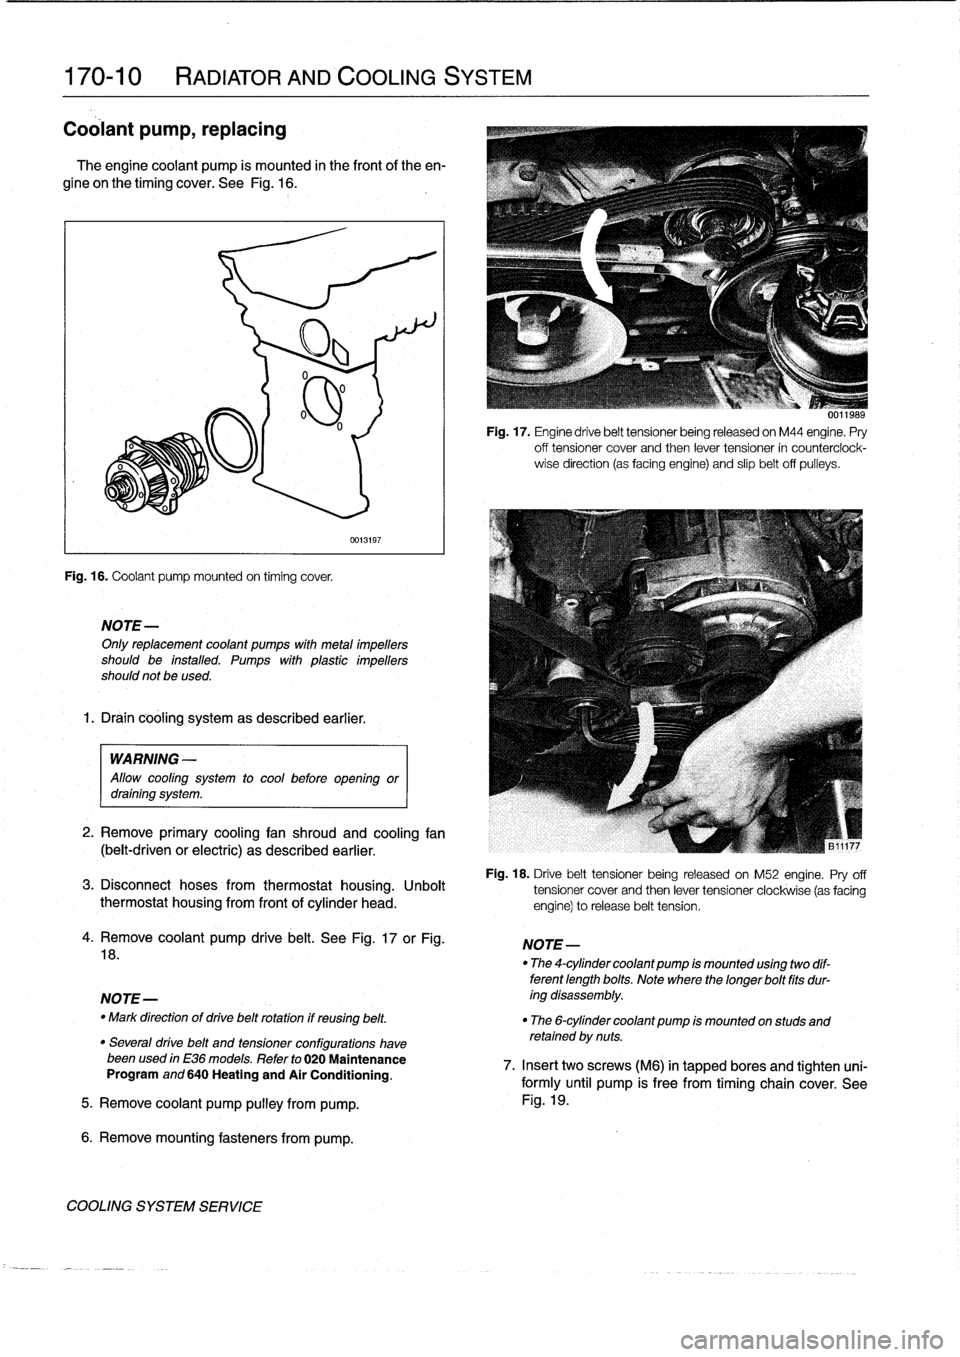 BMW 328i 1998 E36 Workshop Manual 
170-10

	

RADIATOR
AND
COOLING
SYSTEM

Coolant
pump,
replacing

The
engine
coolant
pump
is
mounted
in
the
frontof
the
en-

gine
on
the
timing
cover
.
See
Fig
.
16
.

Fig
.
16
.
Coolant
pump
mounted
